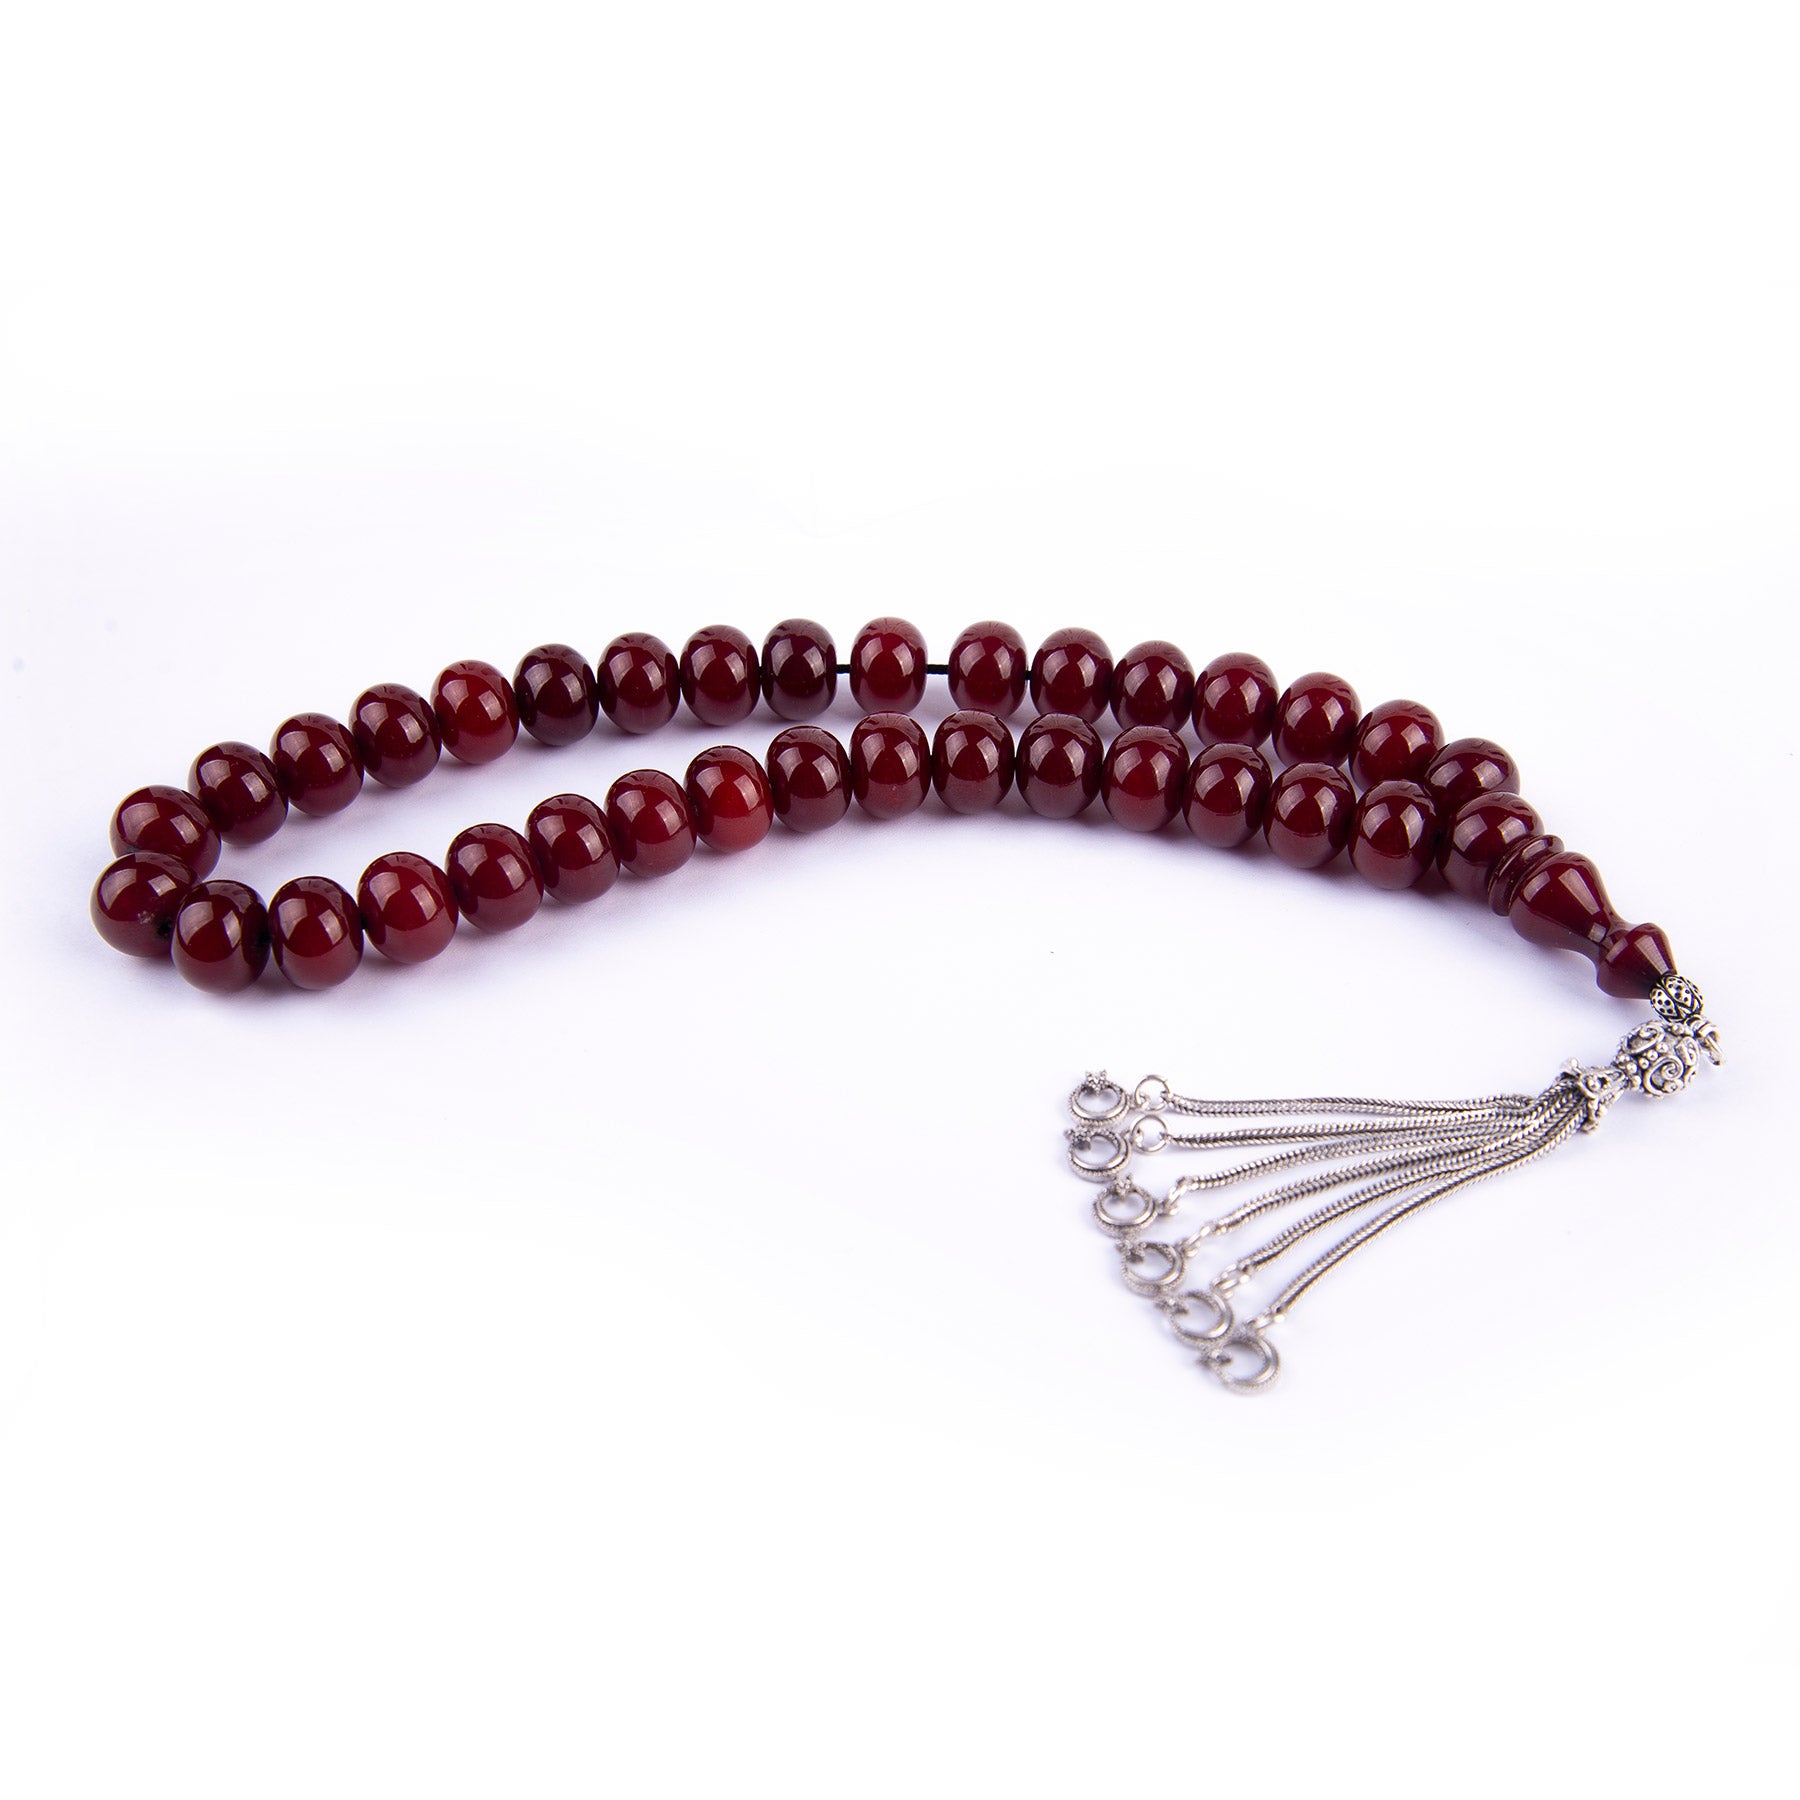 Ottoman Simulation Crimped Amber Rosary with Heavy Silver Tassels 3